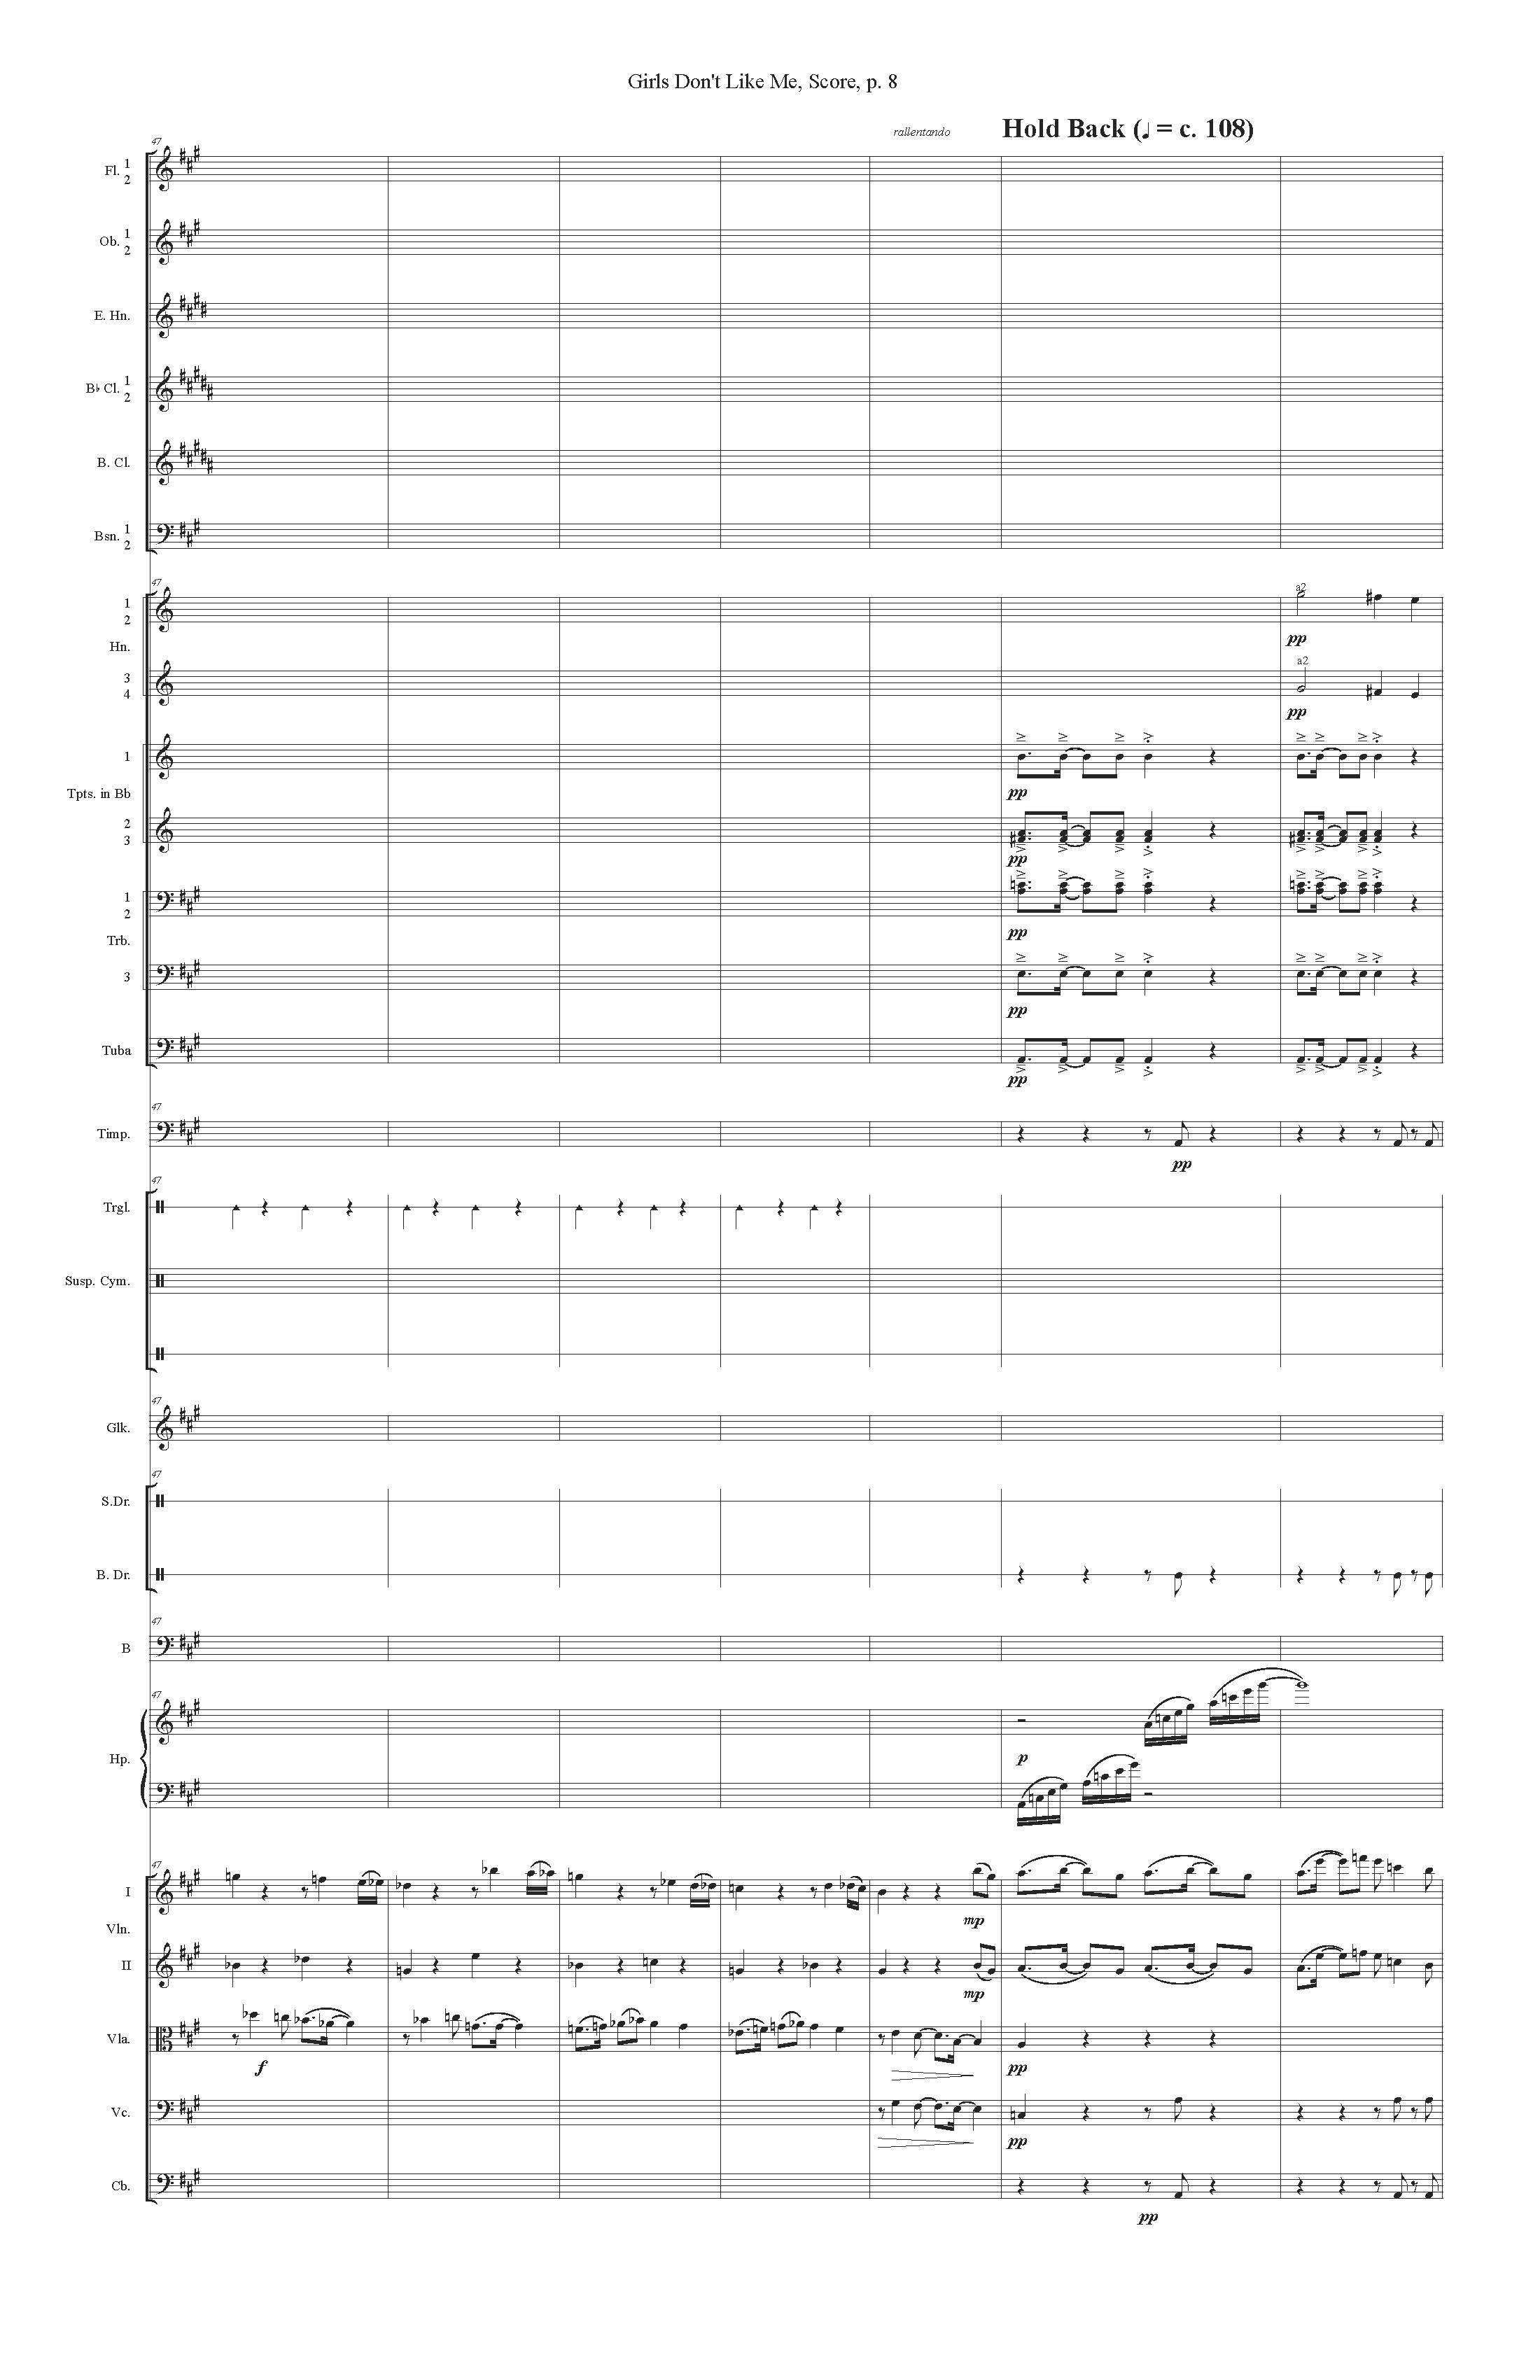 GIRLS DON'T LIKE ME ORCH - Score_Page_08.jpg